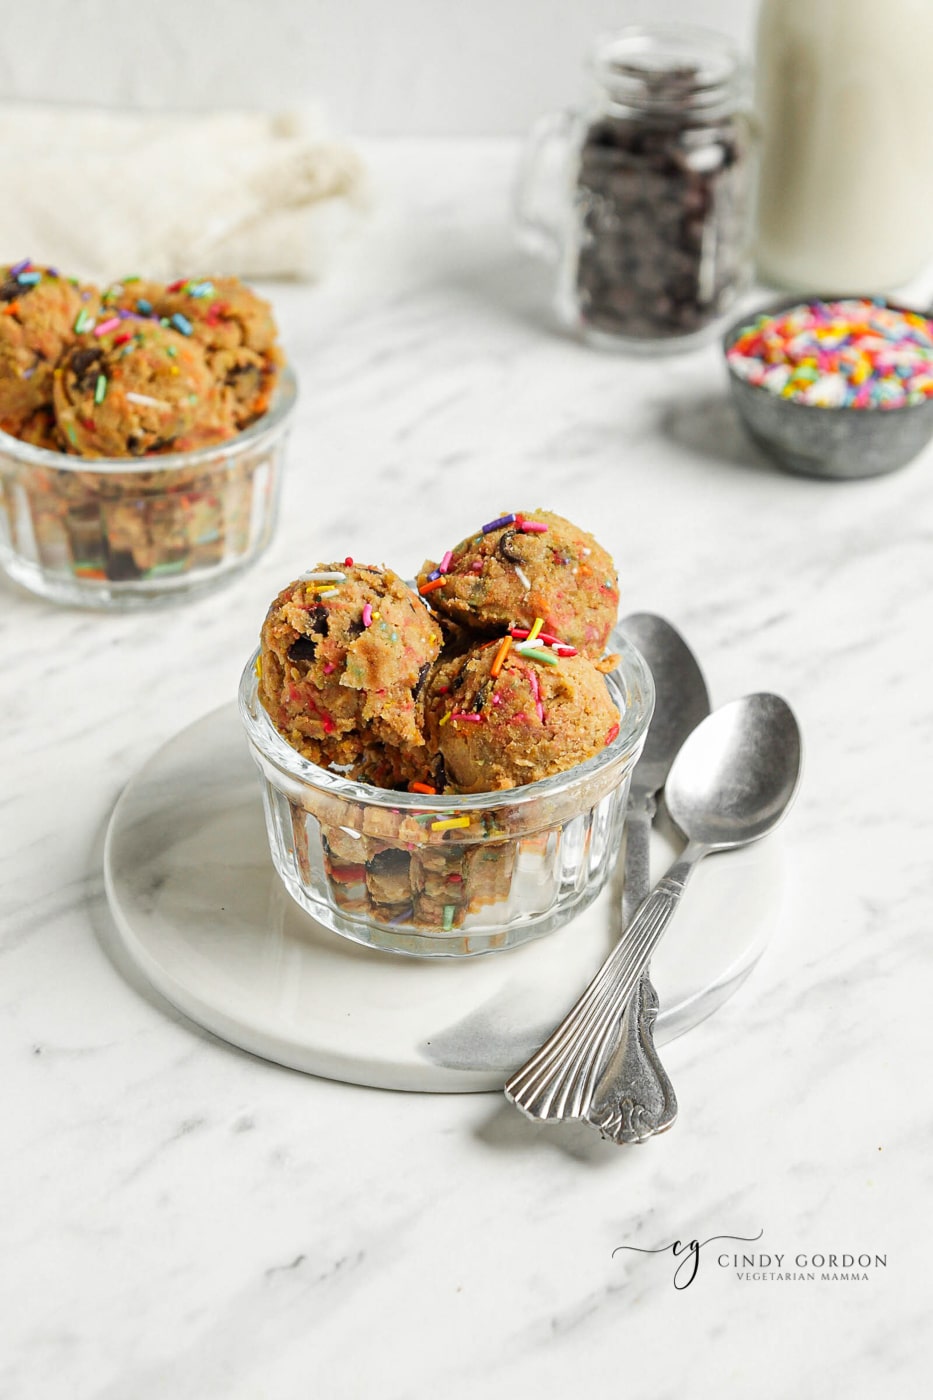 Scoops of edible vegan cookie dough in a glass bowl